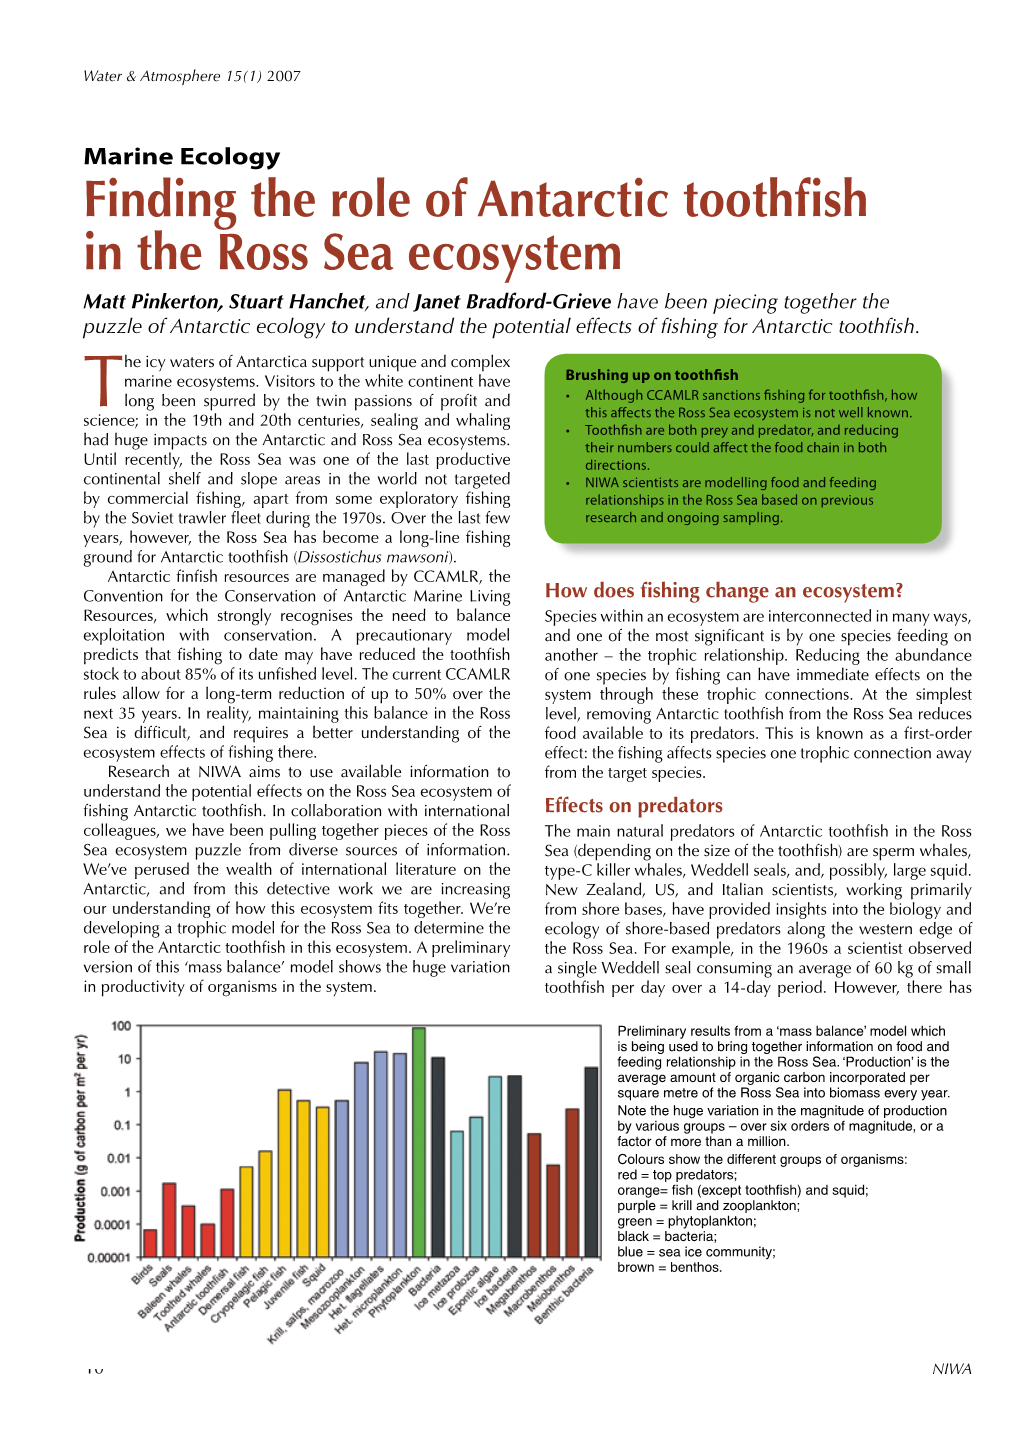 Finding the Role of Antarctic Toothfish in the Ross Sea Ecosystem